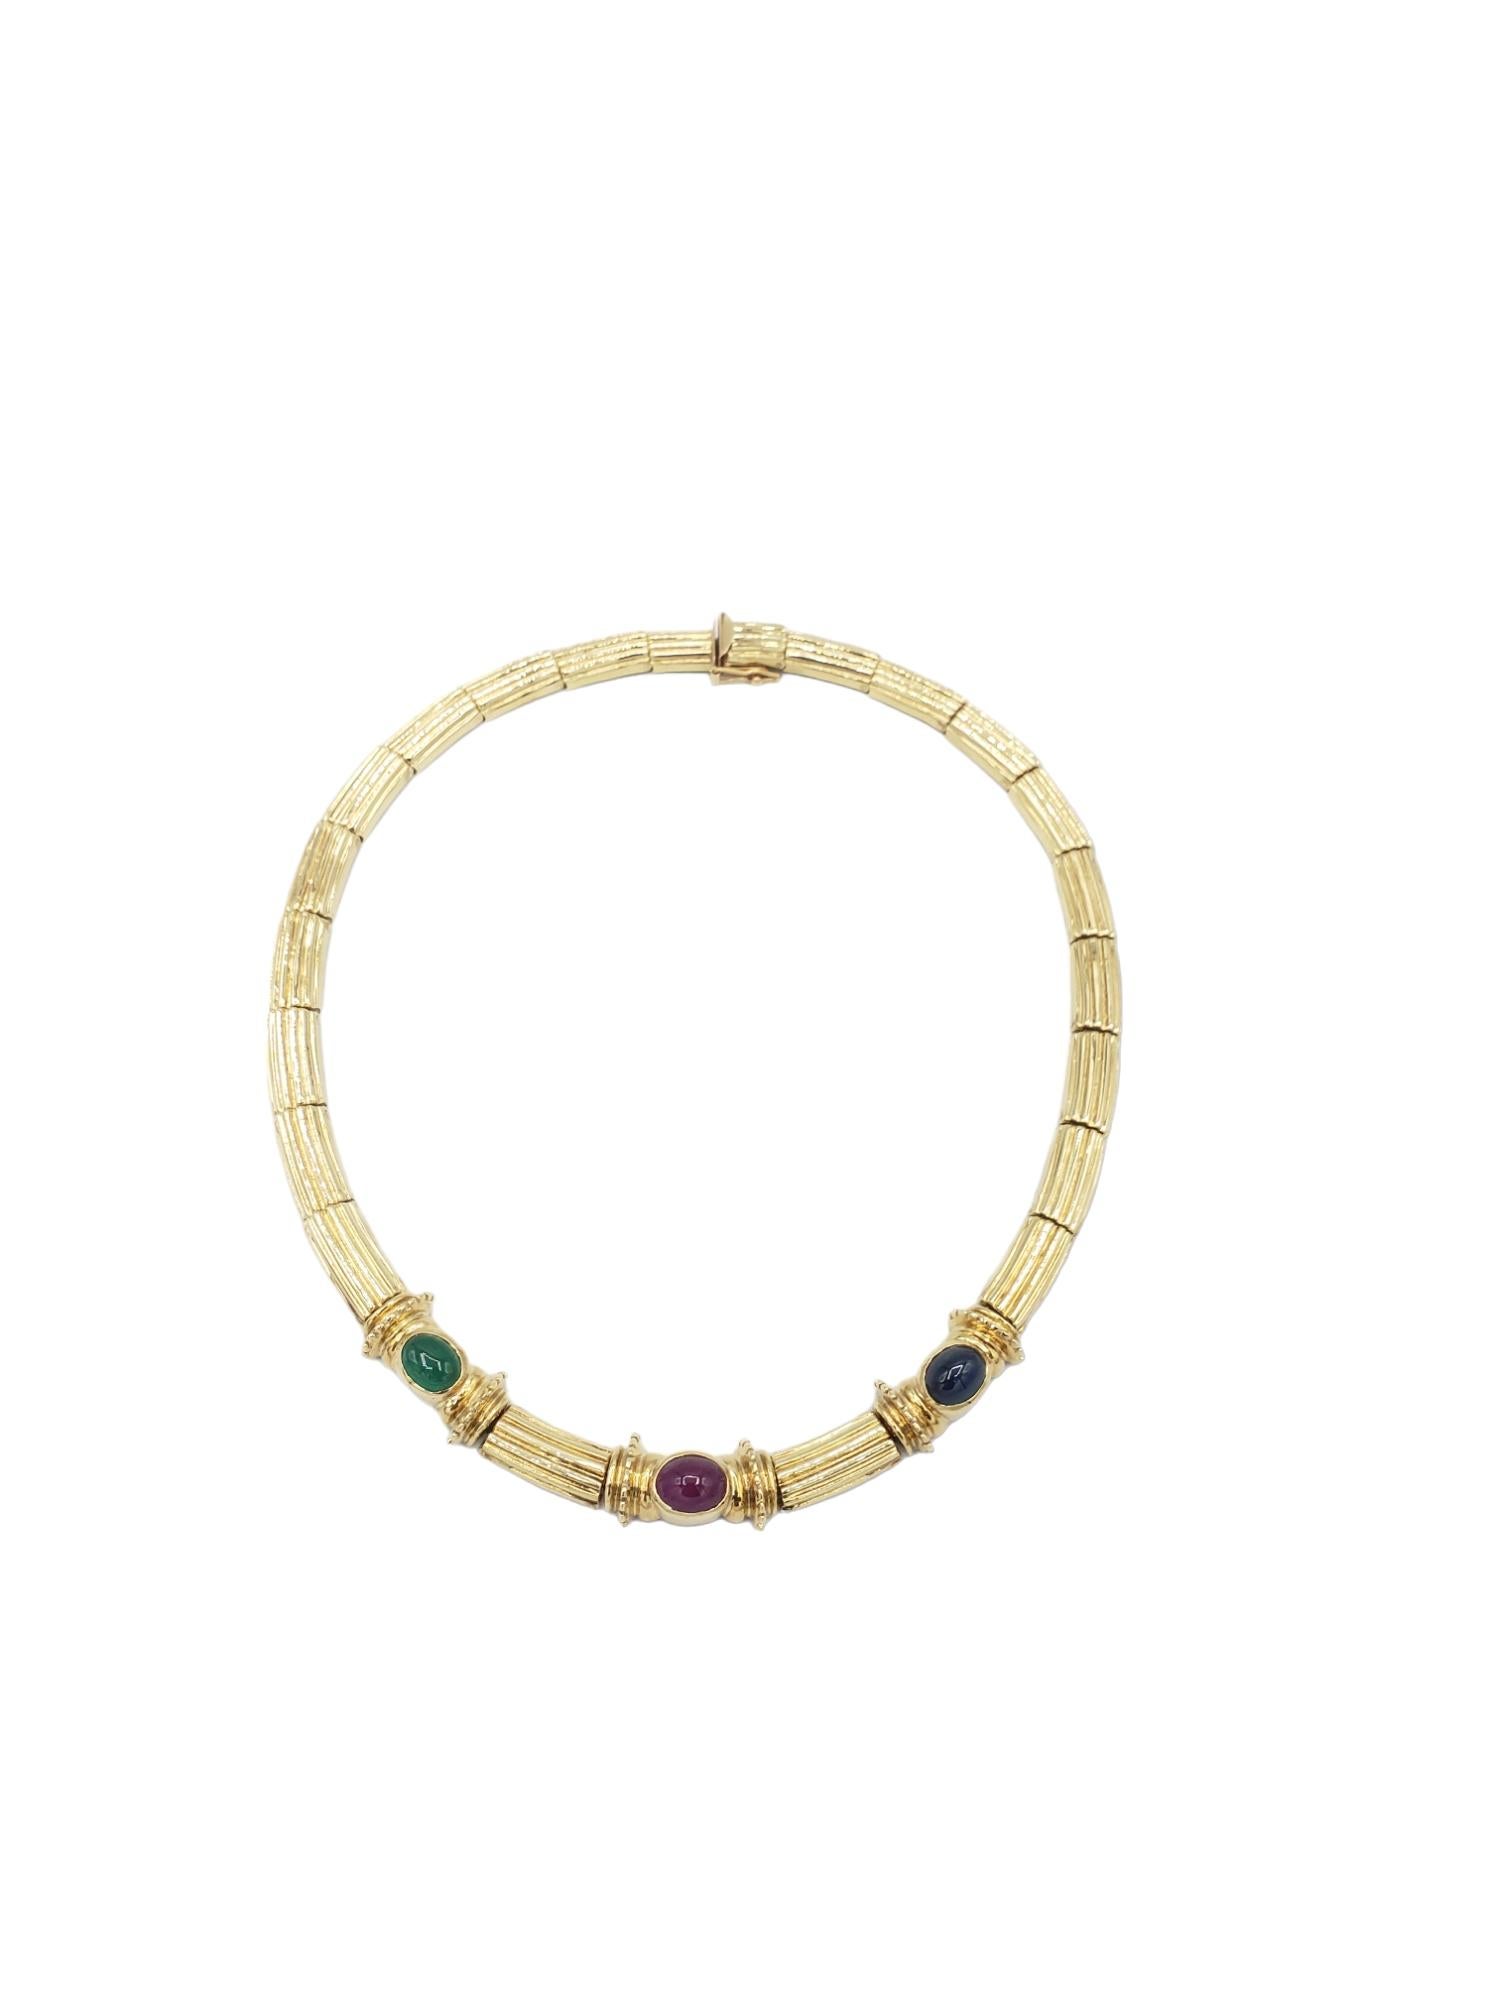 NEW Natural Ruby Sapphire Emerald Necklace in 14K Solid Yellow Gold Wt. 52Grams For Sale 5